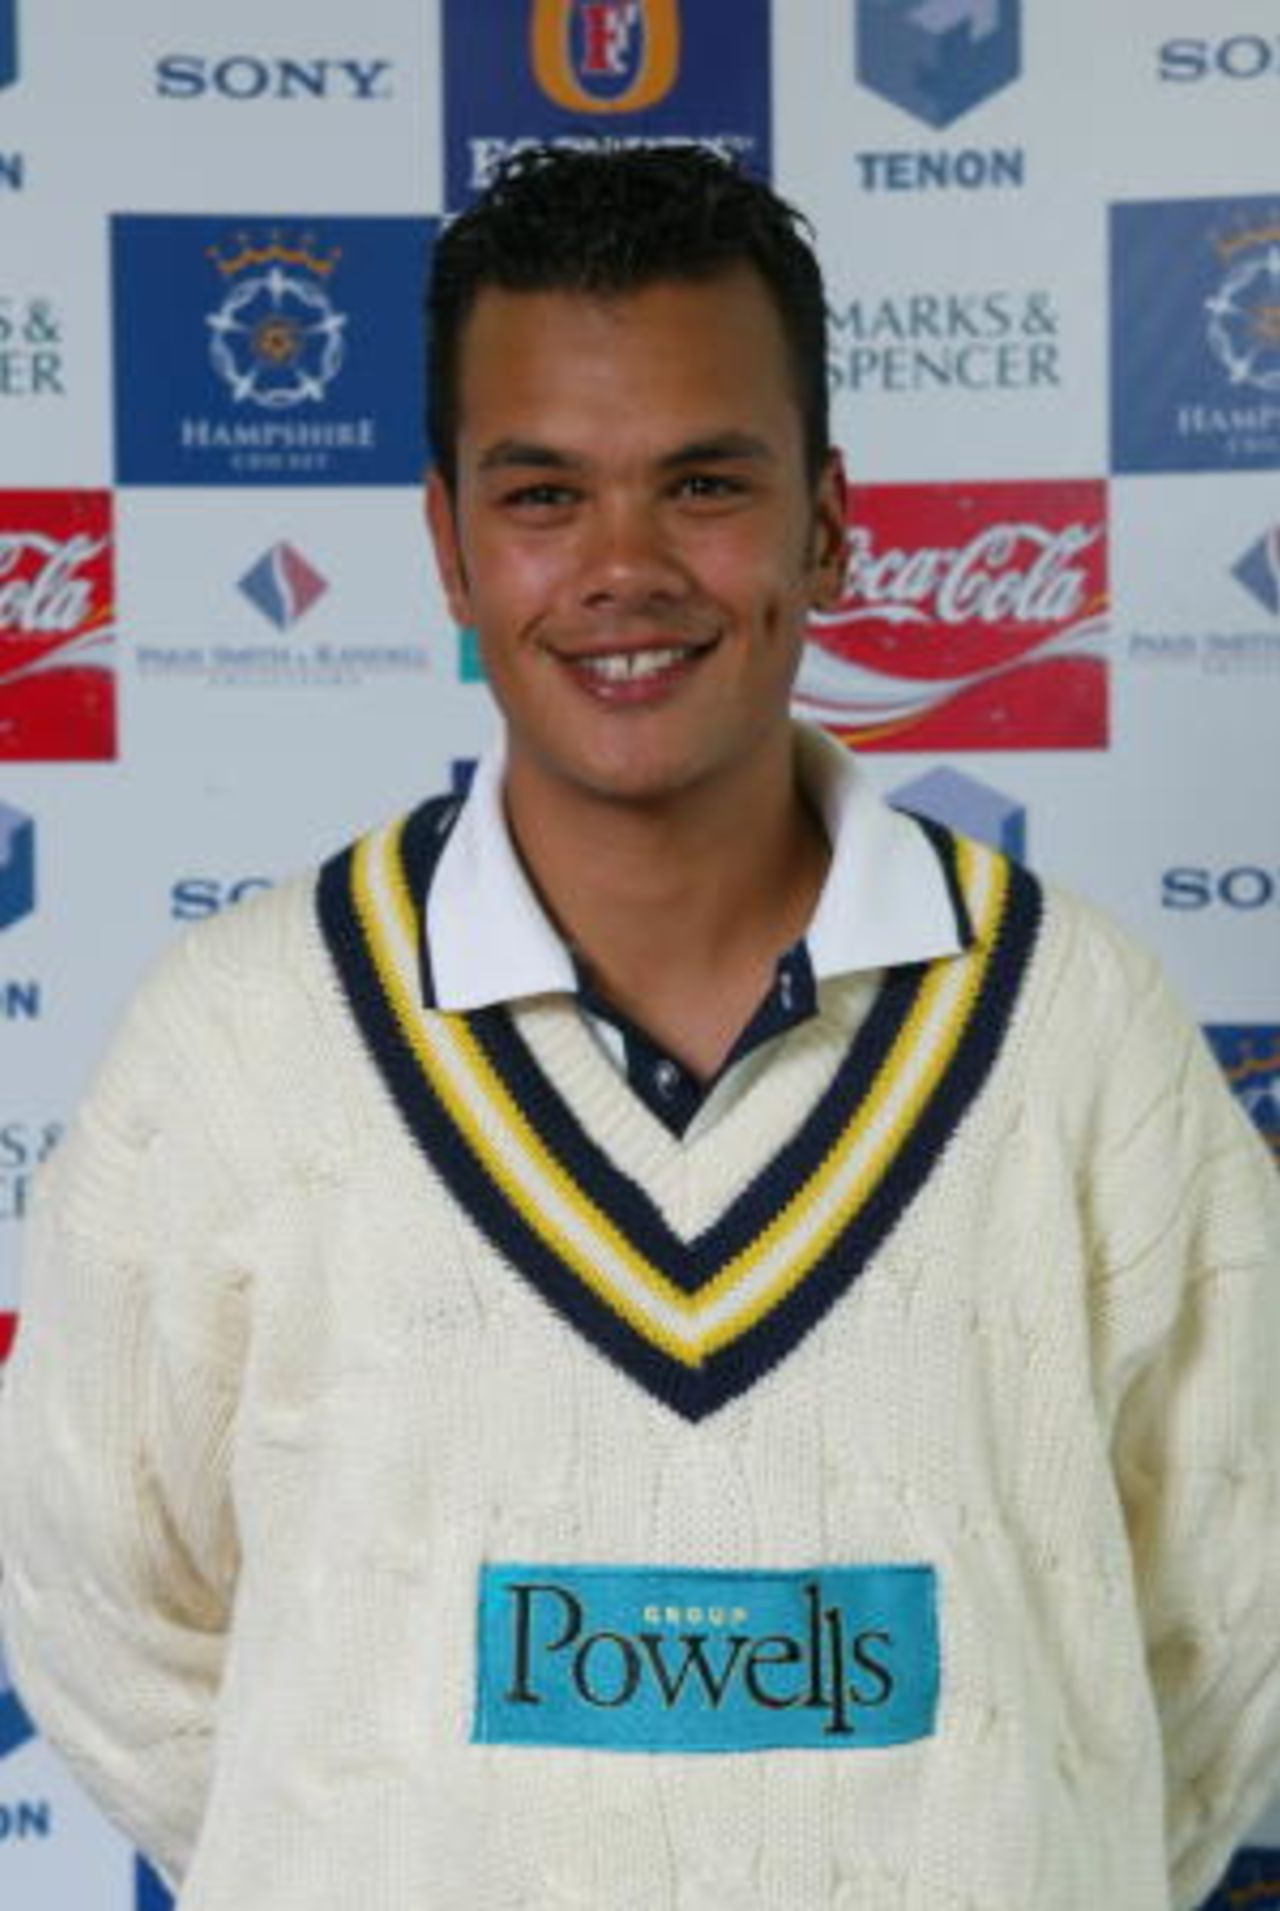 Lawrence Prittipaul Hampshire Cricketer